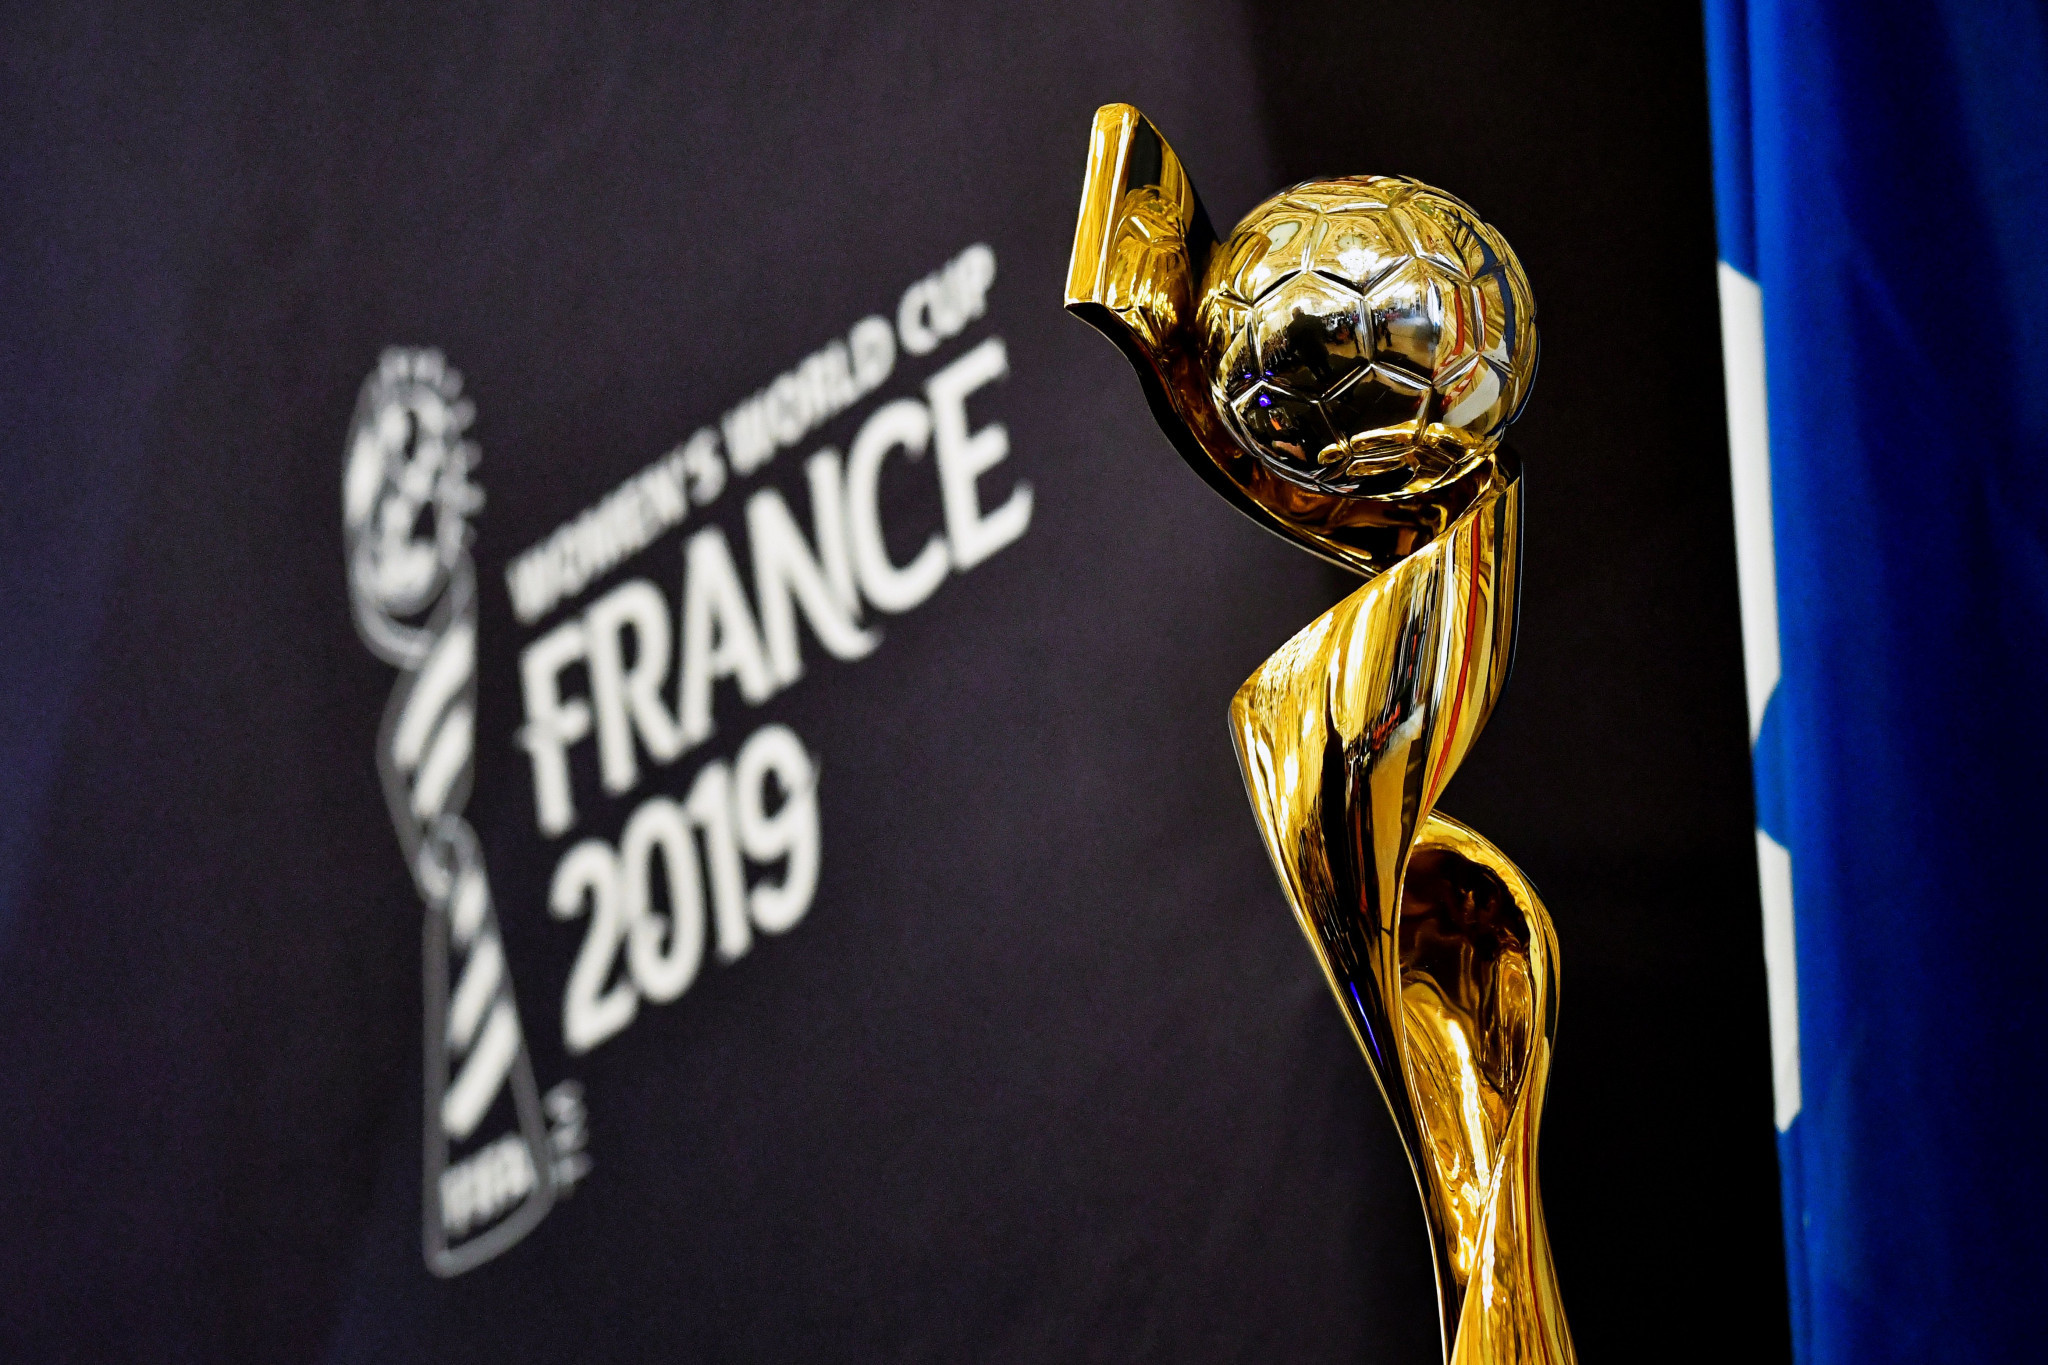 Hosting the 2019 FIFA Women's World Cup was found to have financial benefits for France ©Getty Images